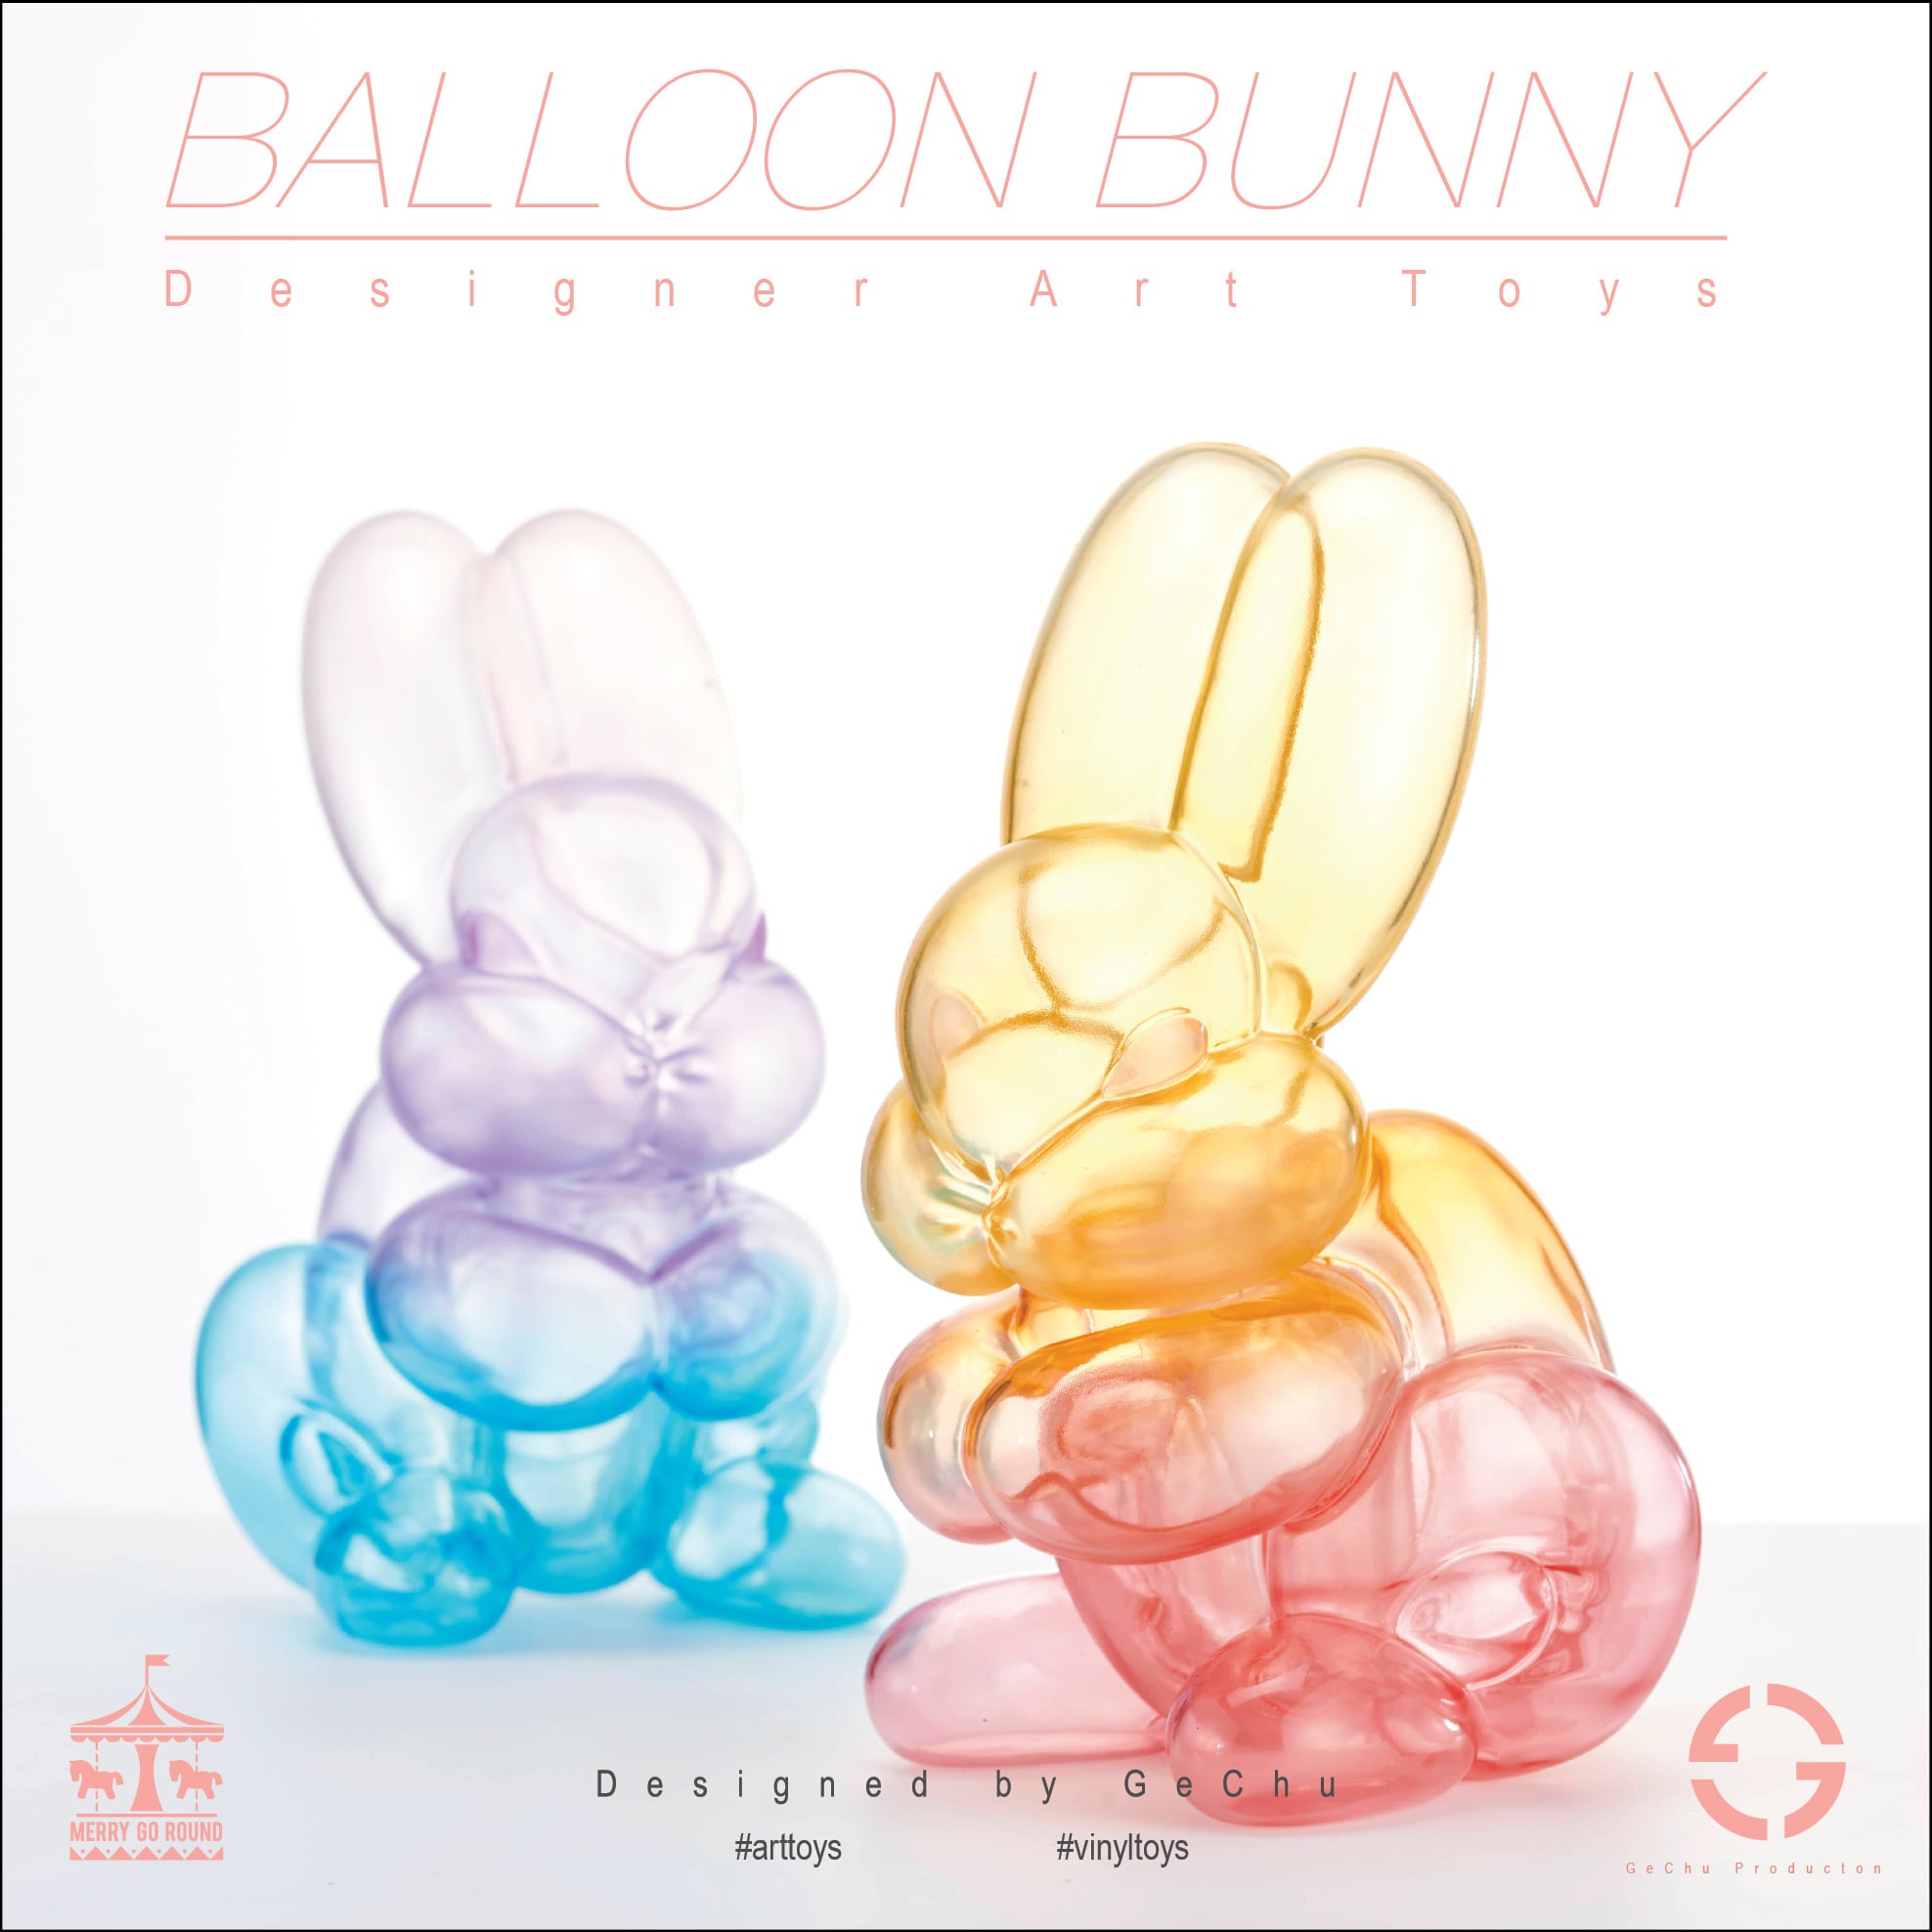 Balloon Bunny by GeChu, a whimsical vinyl toy of a bunny crafted from a clear balloon.